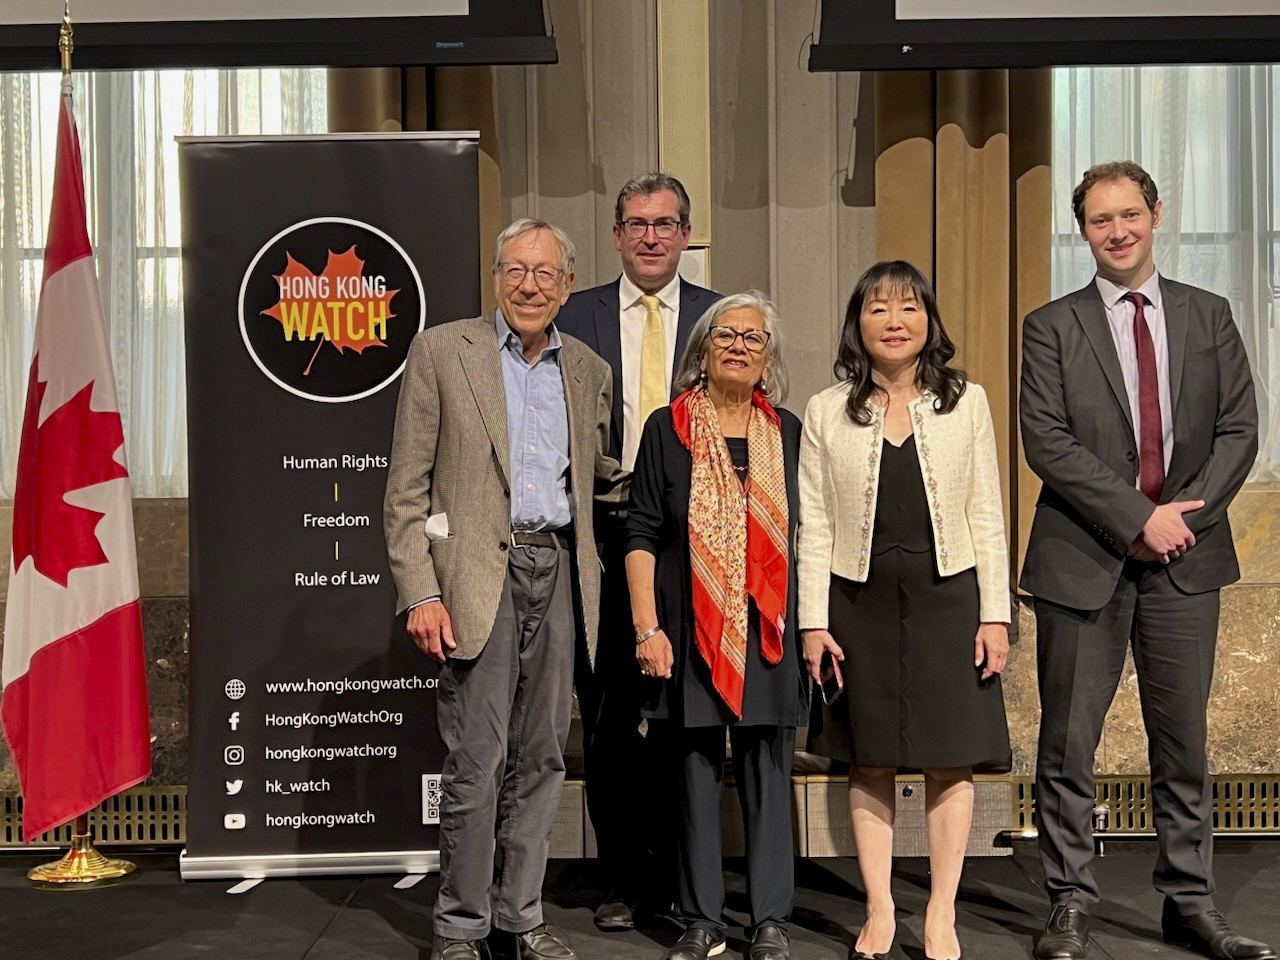 Tuesday, May 30, 2023 – Senator Ratna Omidvar, centre, participates in the launch of Hong Kong Watch Canada, an organization defending the human rights, freedoms and rule of law in Hong Kong. From left: the Honourable Irwin Cotler, international patron of Hong Kong Watch; Benedict Rogers, co-founder and chief executive of Hong Kong Watch; Senator Omidvar; Aileen Calverley, co-founder and trustee of Hong Kong Watch; and Sam Goodman, director of policy and advocacy of Hong Kong Watch.